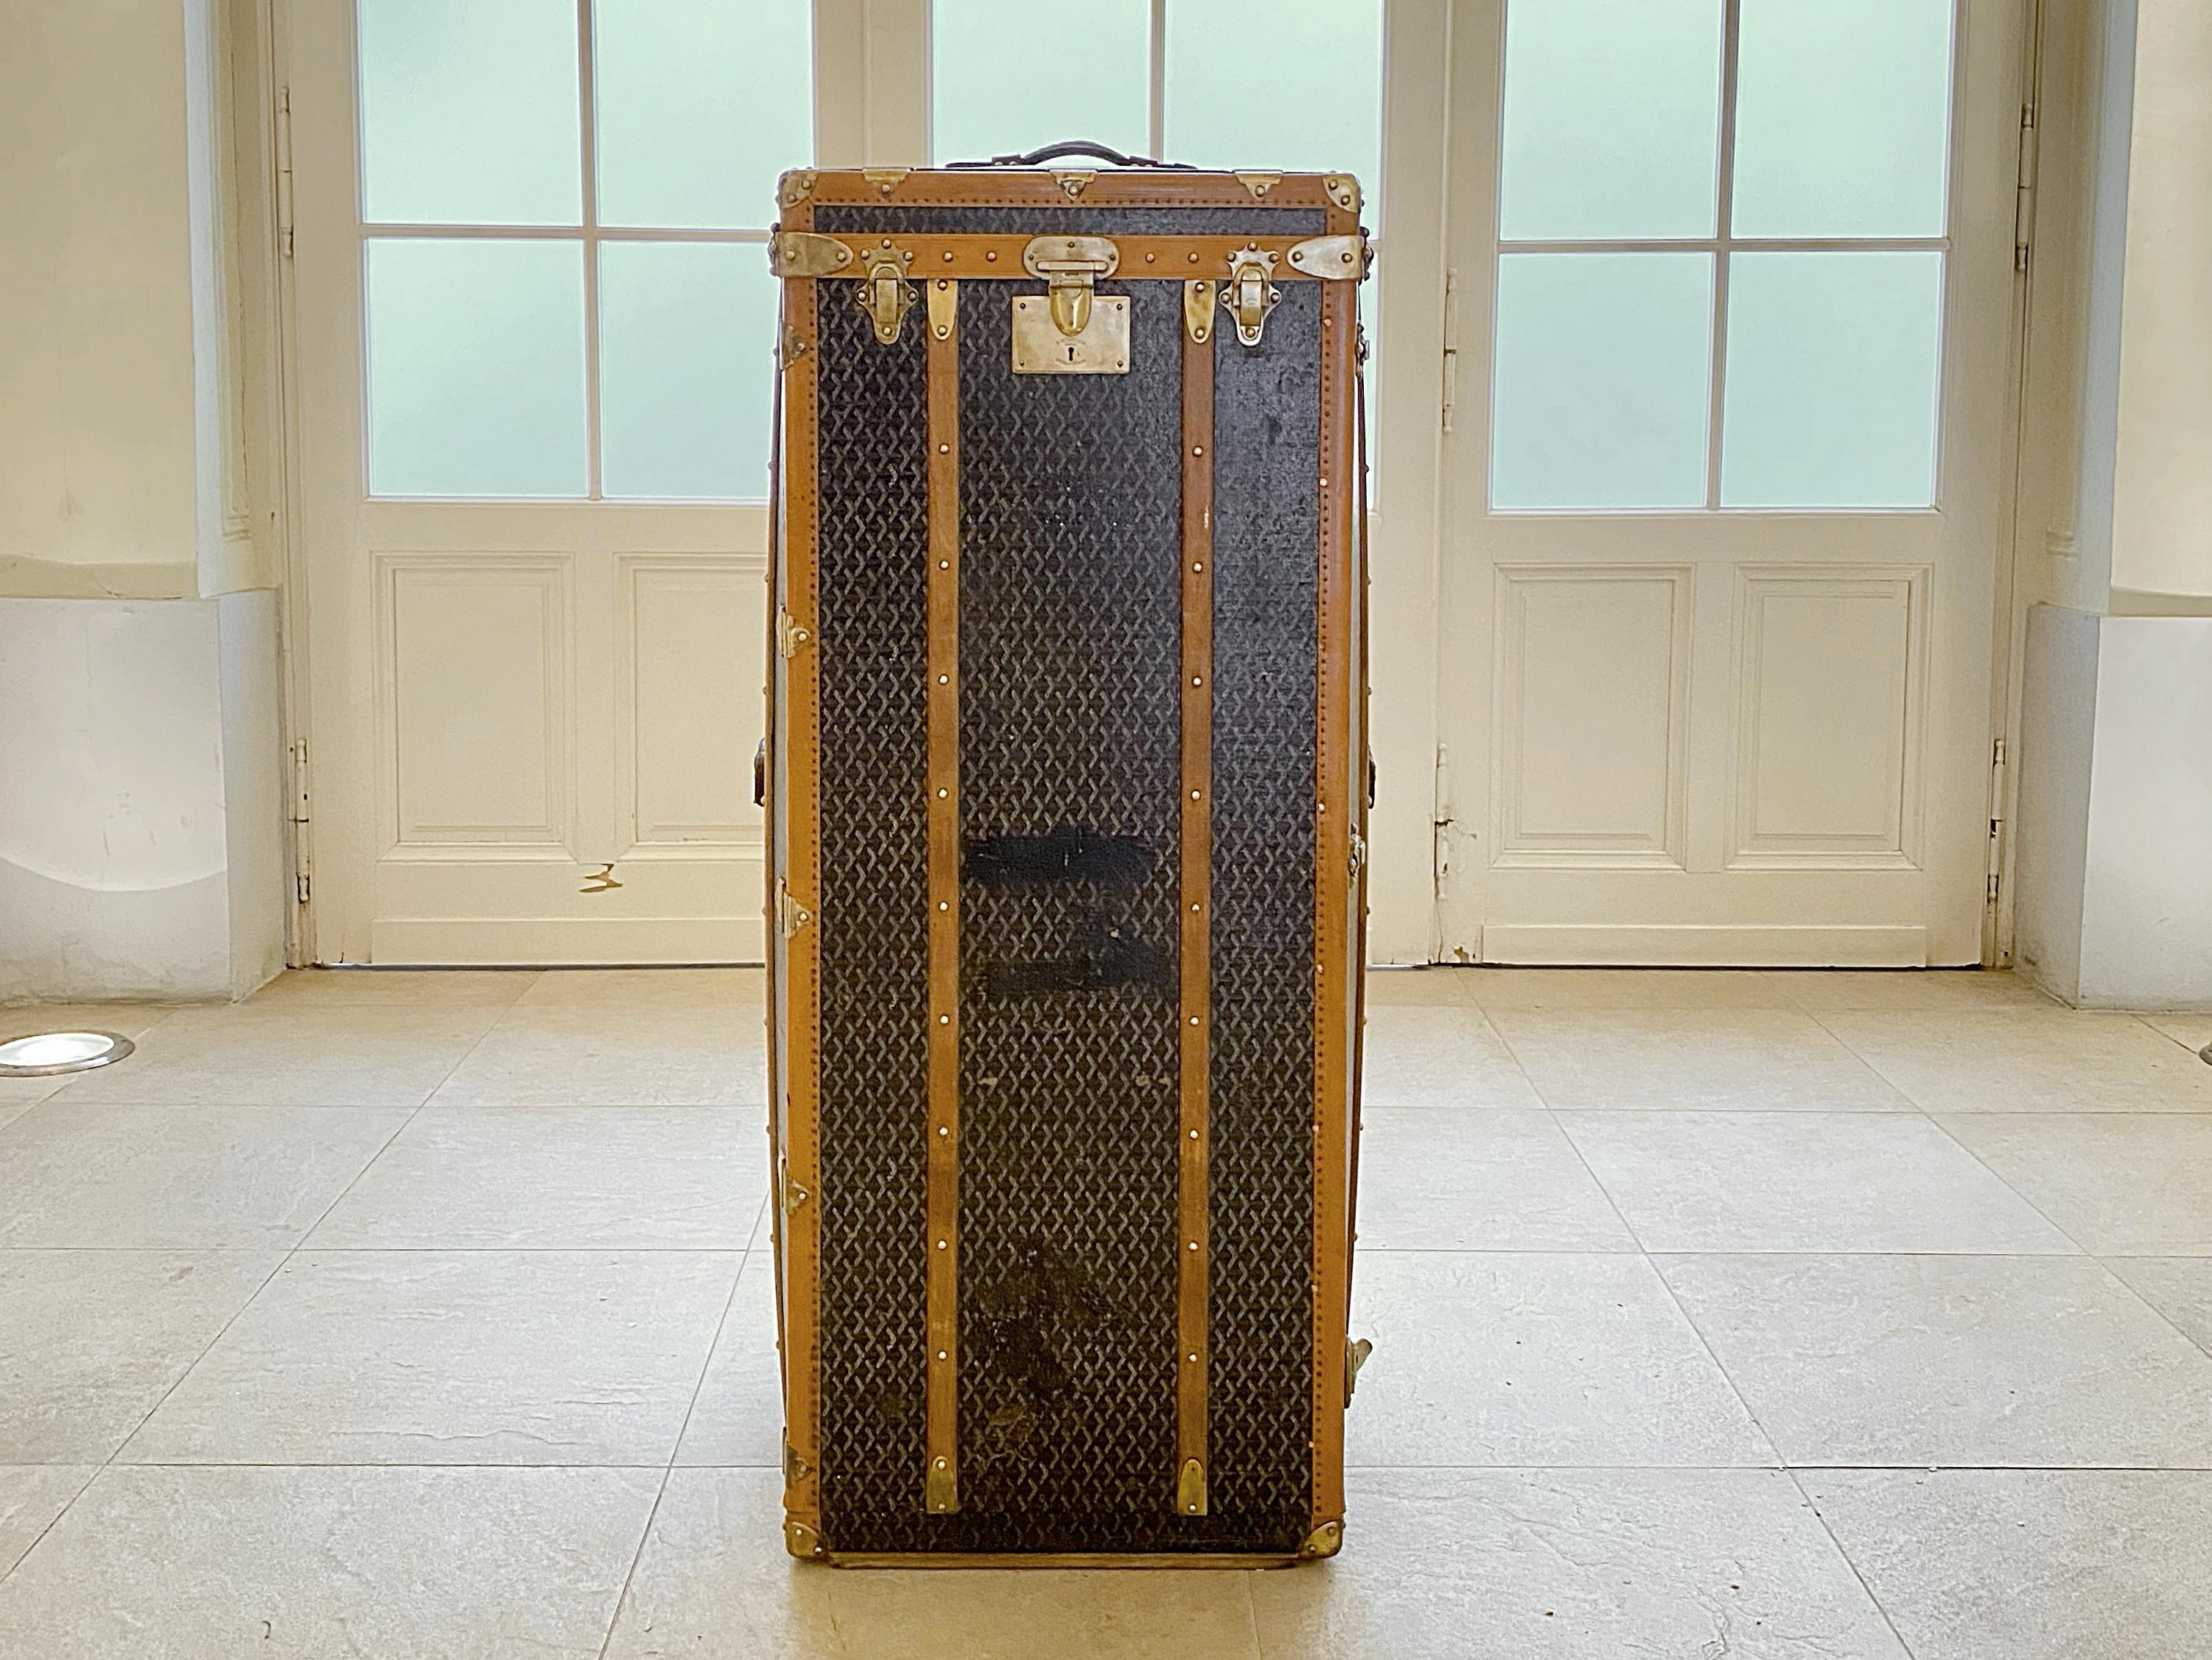 Early 1910s very rare Goyard wardrobe trunk handmade in France. This was the biggest trunk that was ever made by Goyard. The trunk is in very good condition with nice patina. Perfect to use as a chest, console, blanket box or coffee table.

The